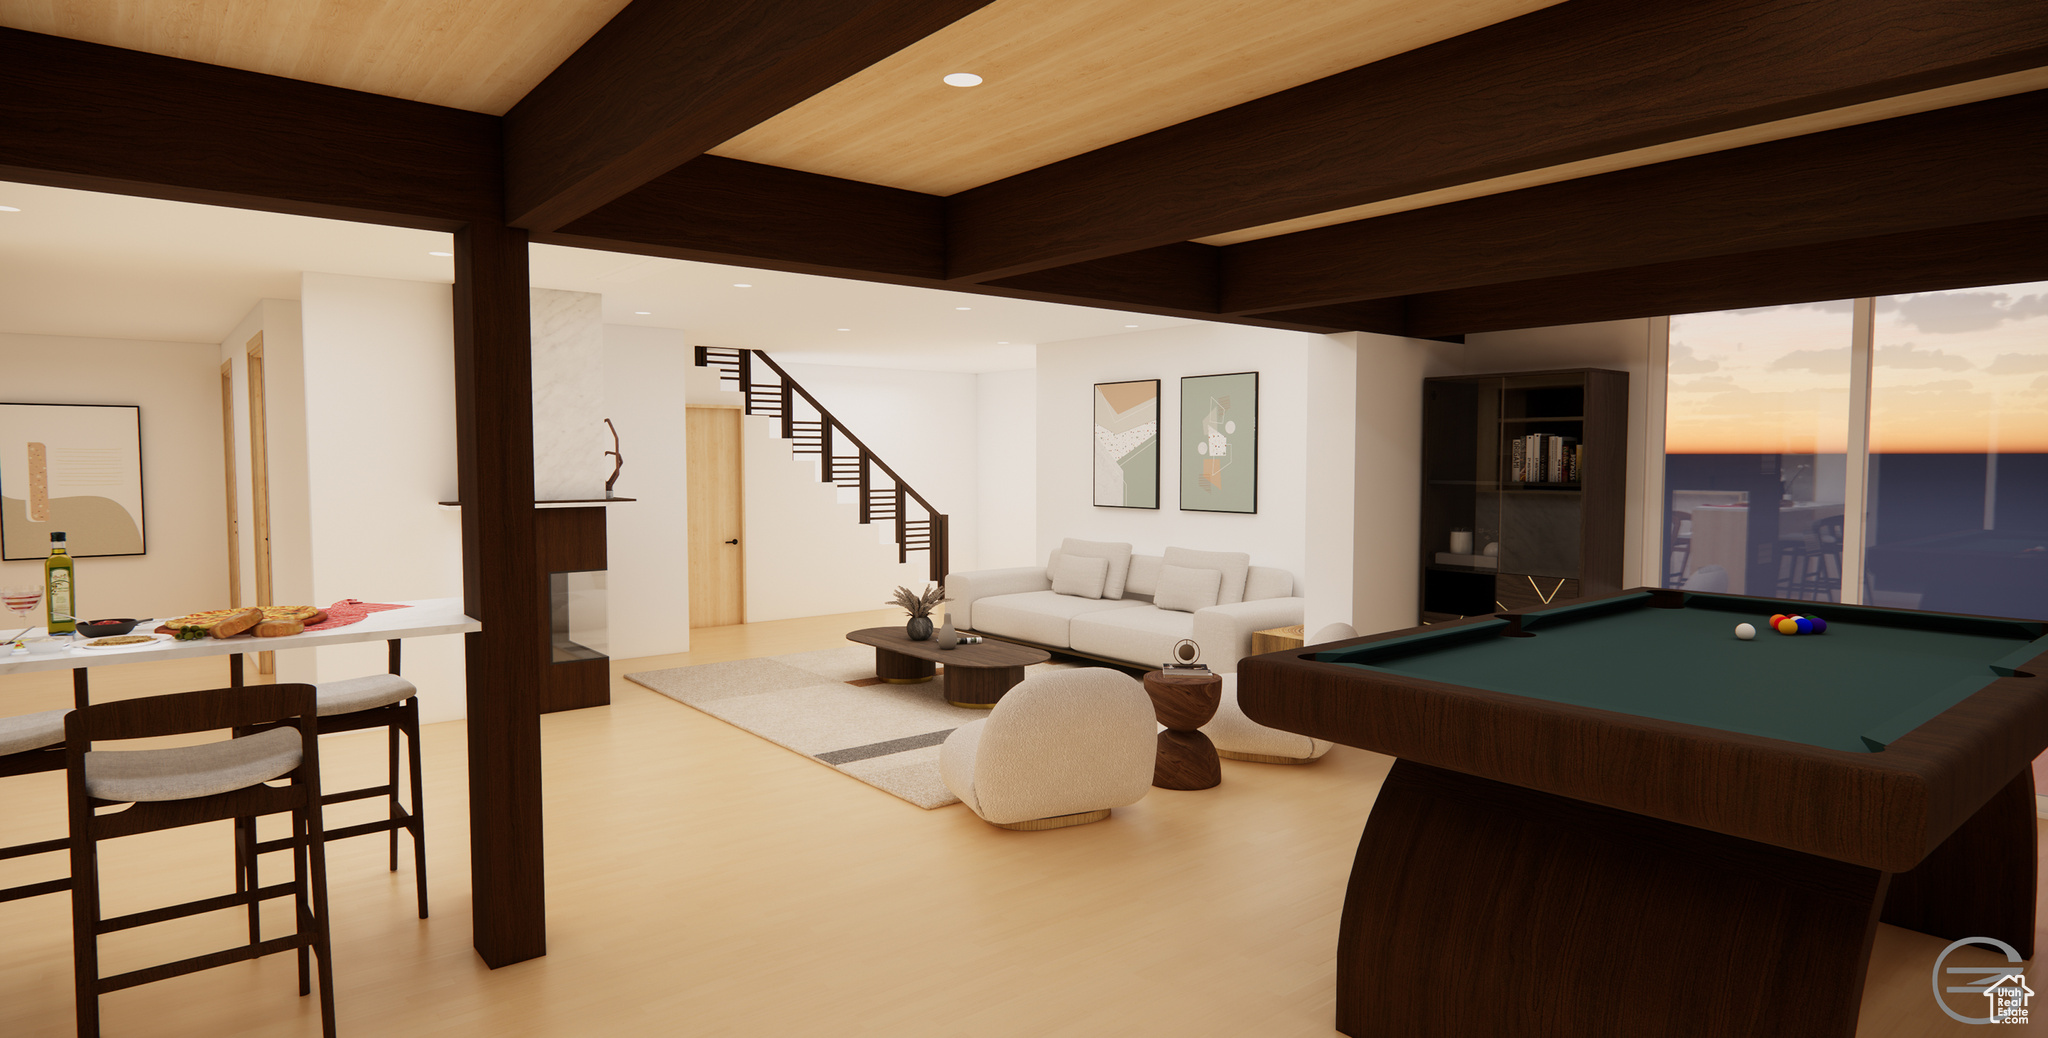 Game room with pool table and wood ceiling - RENDERING